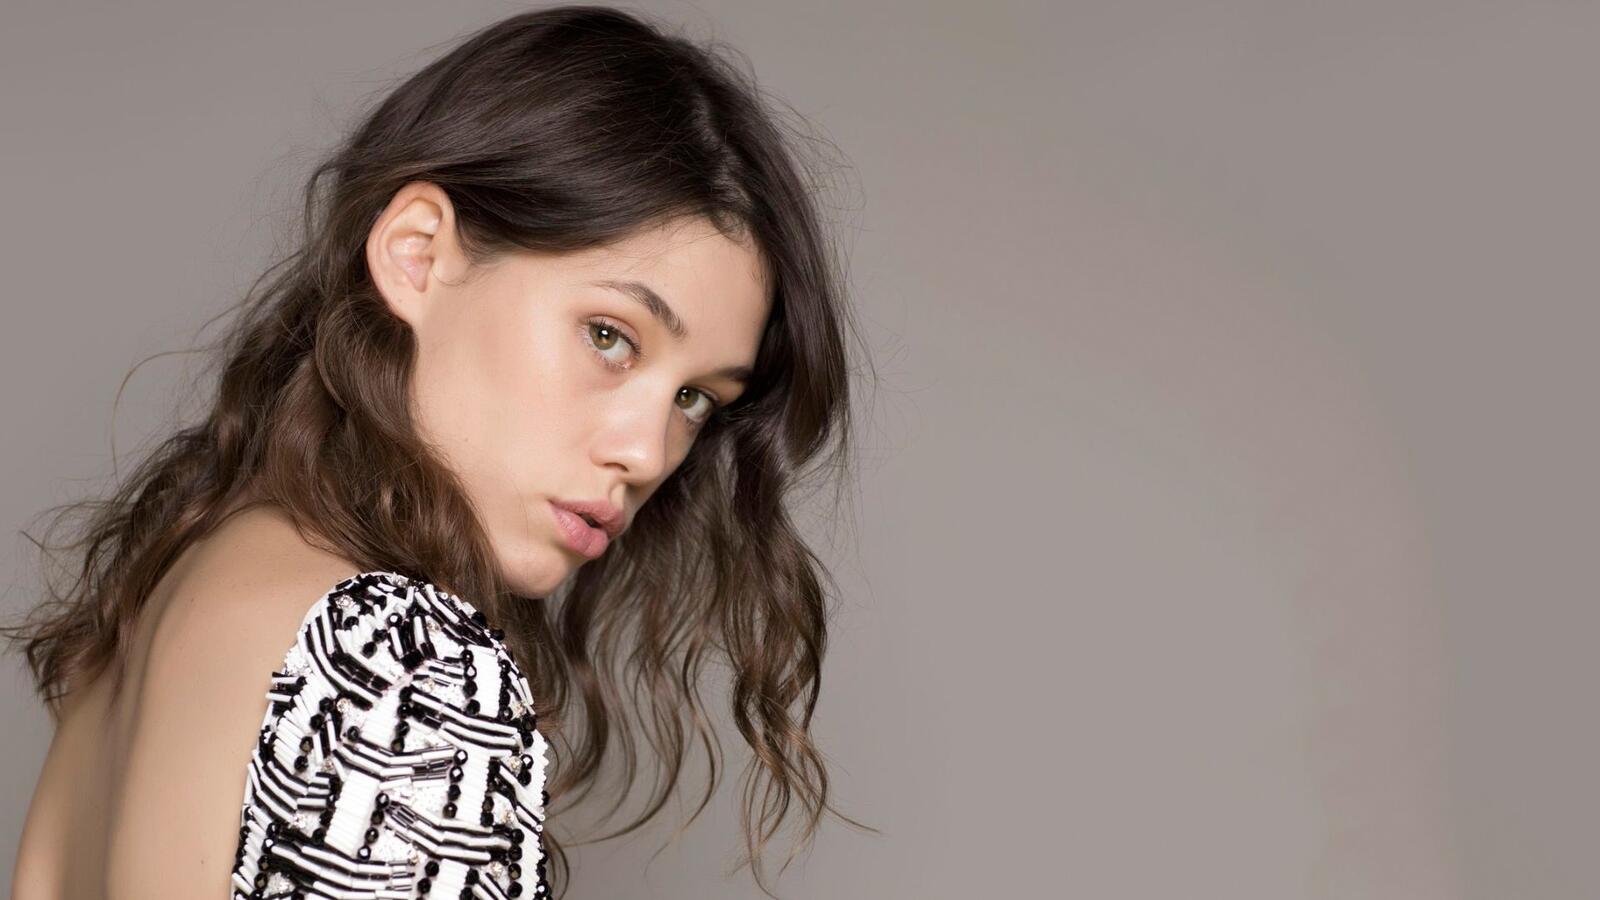 Free photo Selfies of actress Astrid Berges-Frisbey.